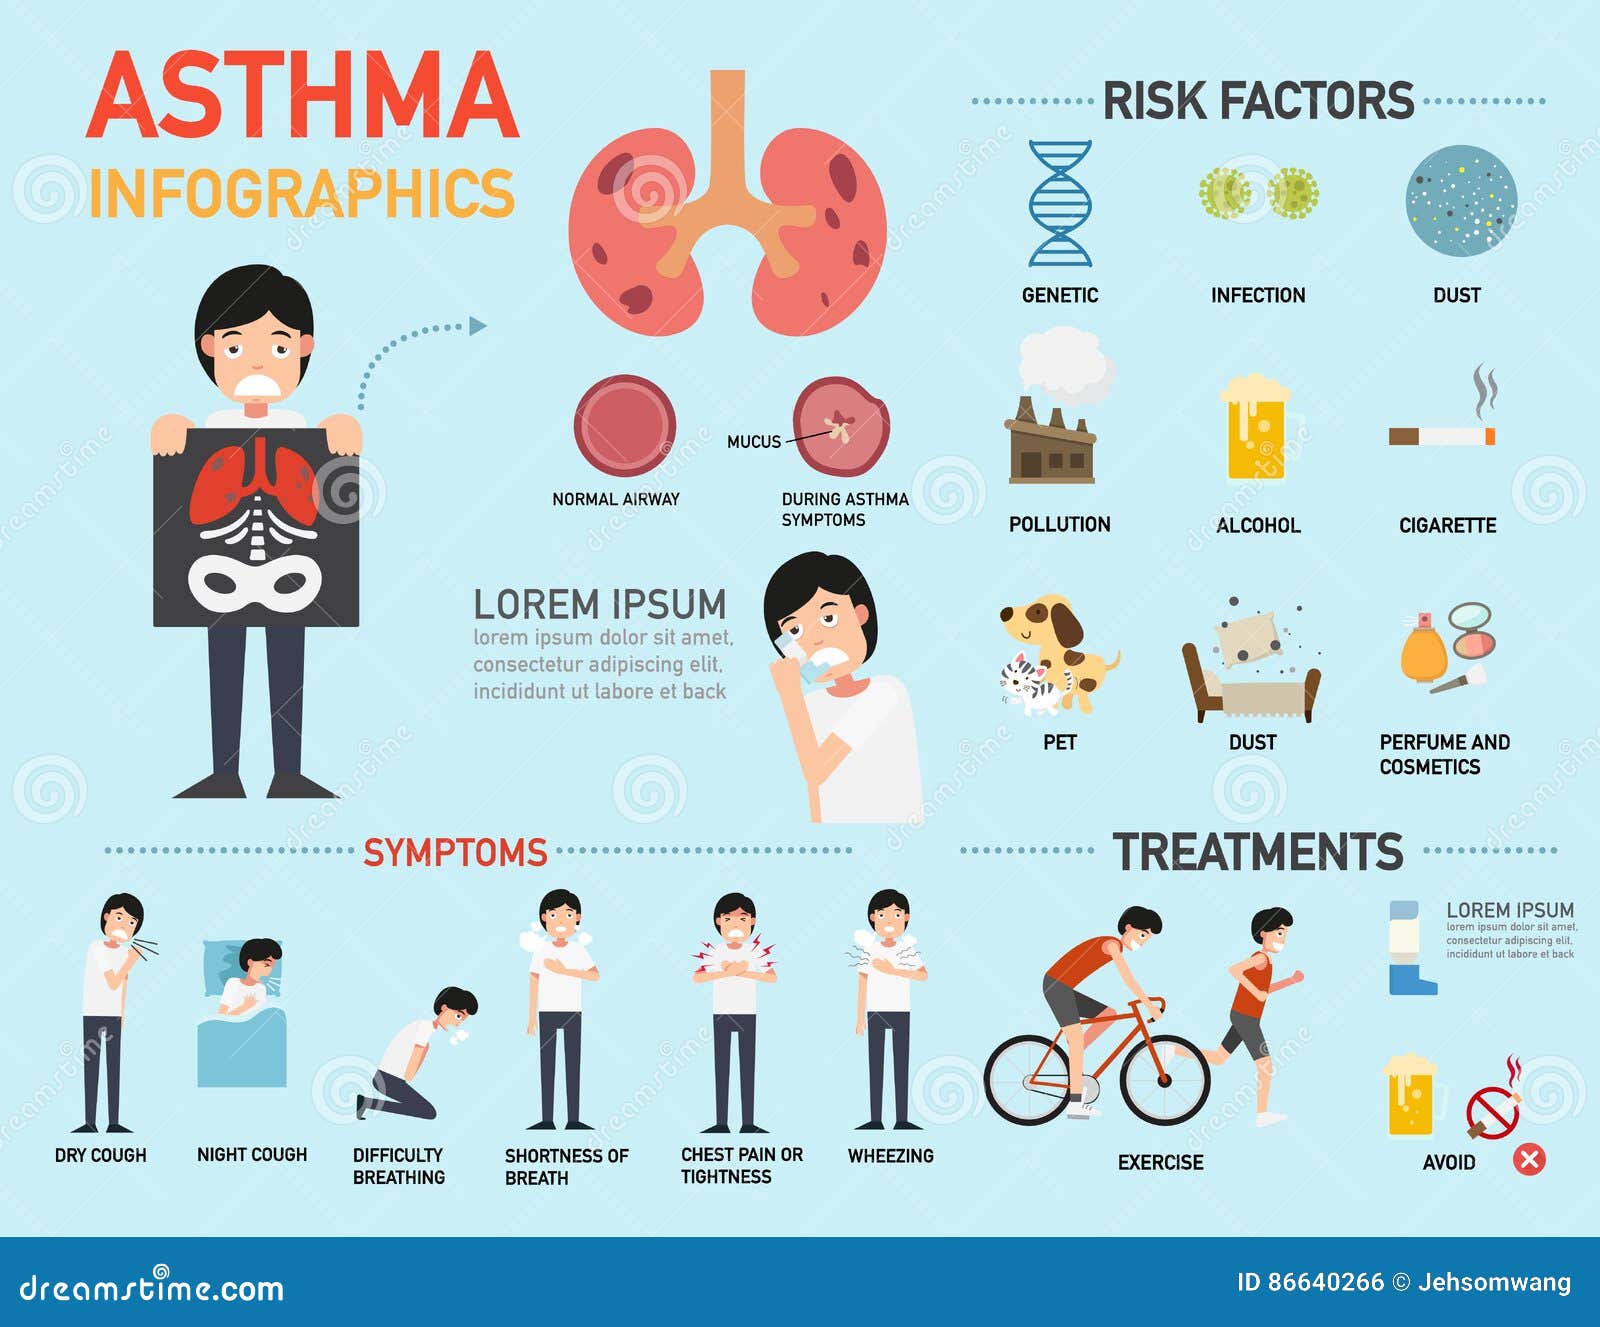 asthma symptoms infographic